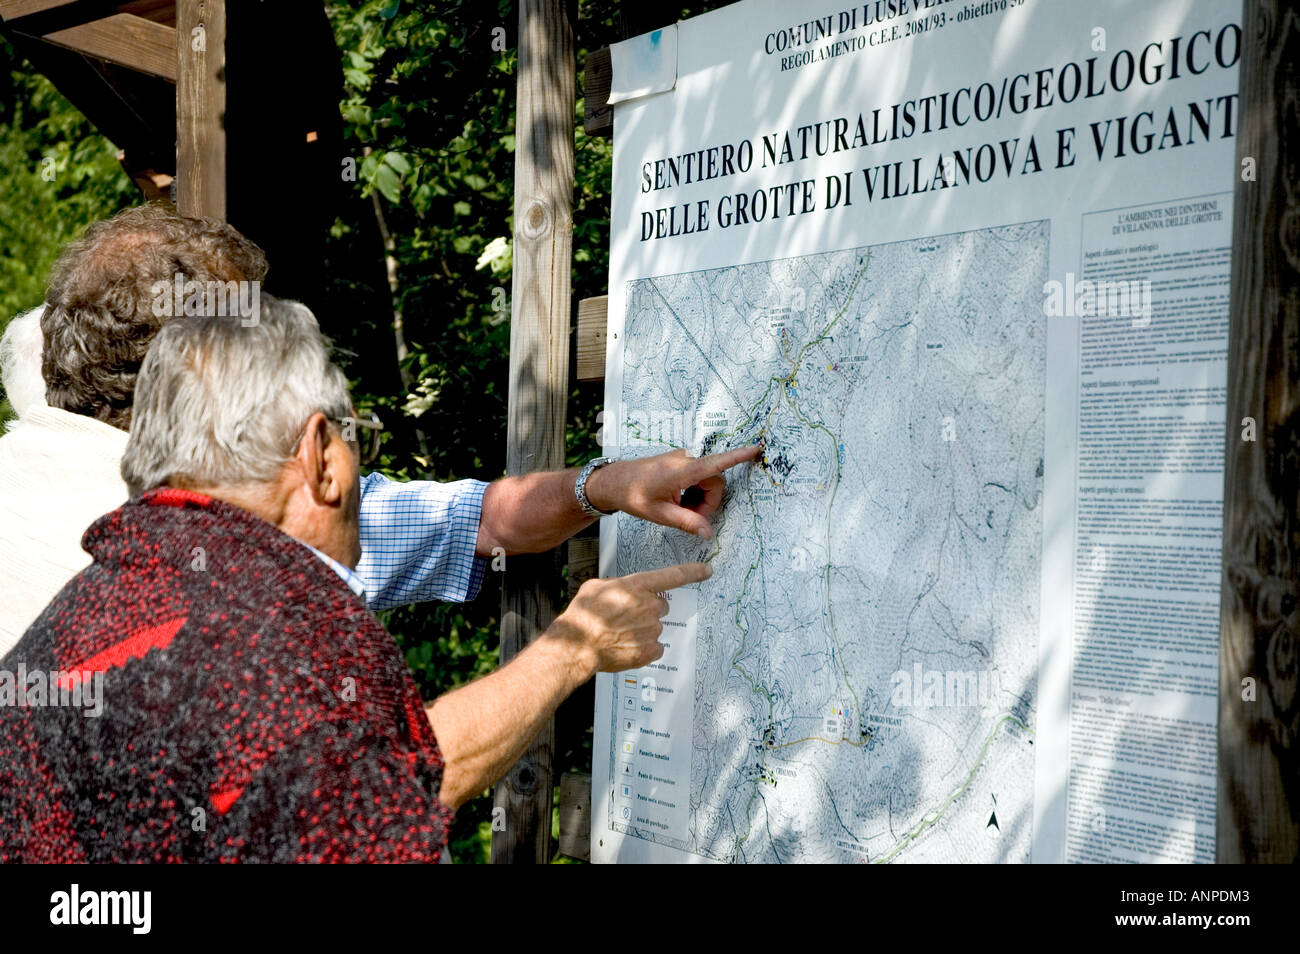 outside the cave people watch the map - sign of villanova delle grotte - friuli udine Stock Photo